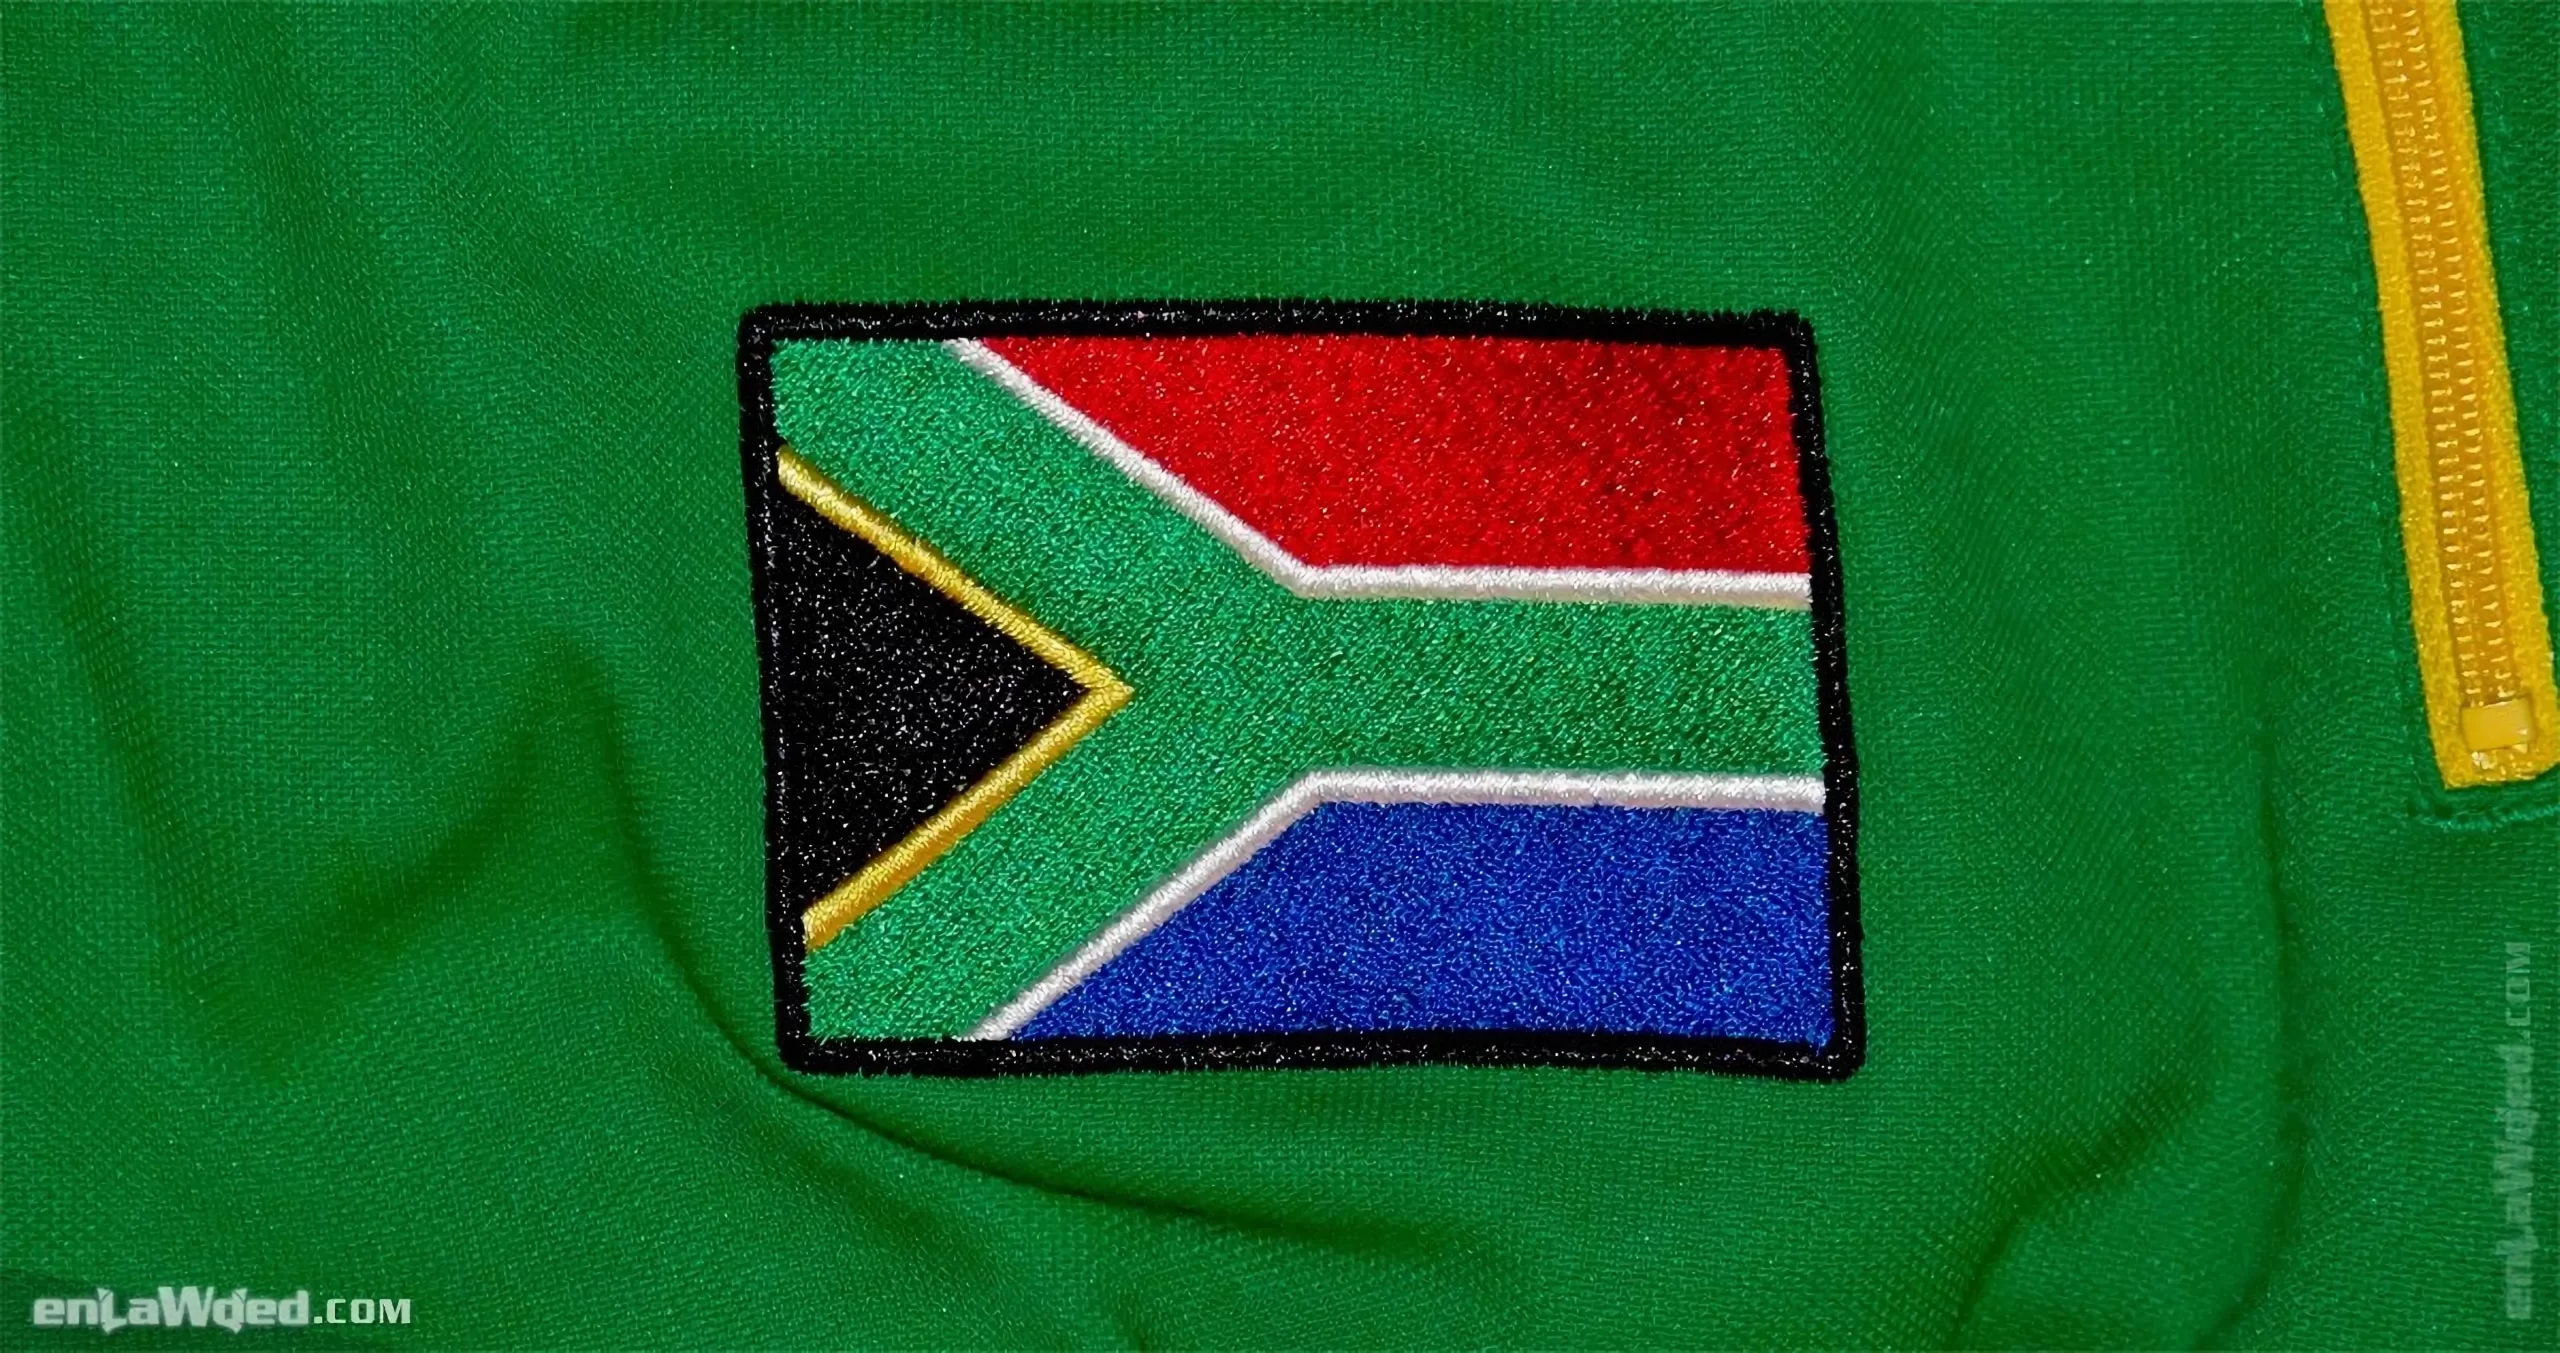 6th interior view of the Adidas Originals Cape Town Track Top